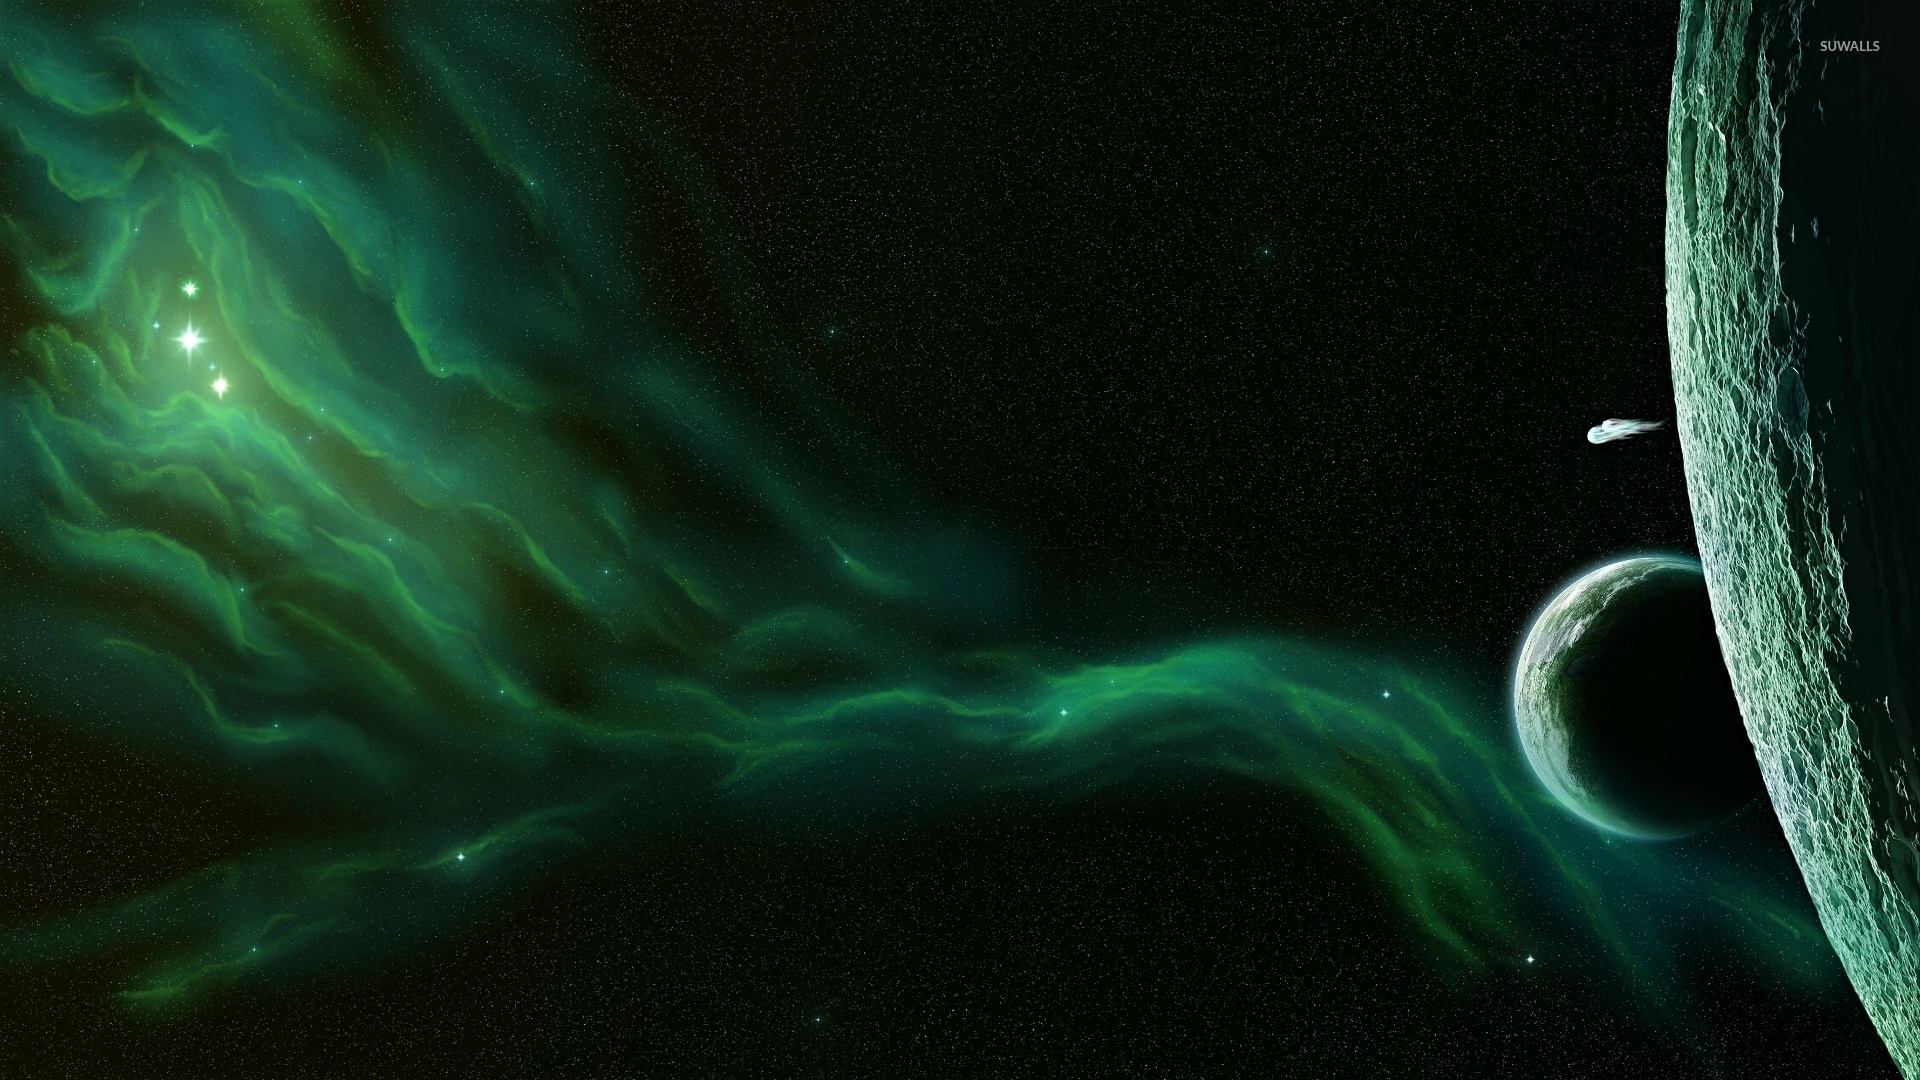 Green Nebula: Giant planets, Comet in deep space, Star formation. 1920x1080 Full HD Wallpaper.